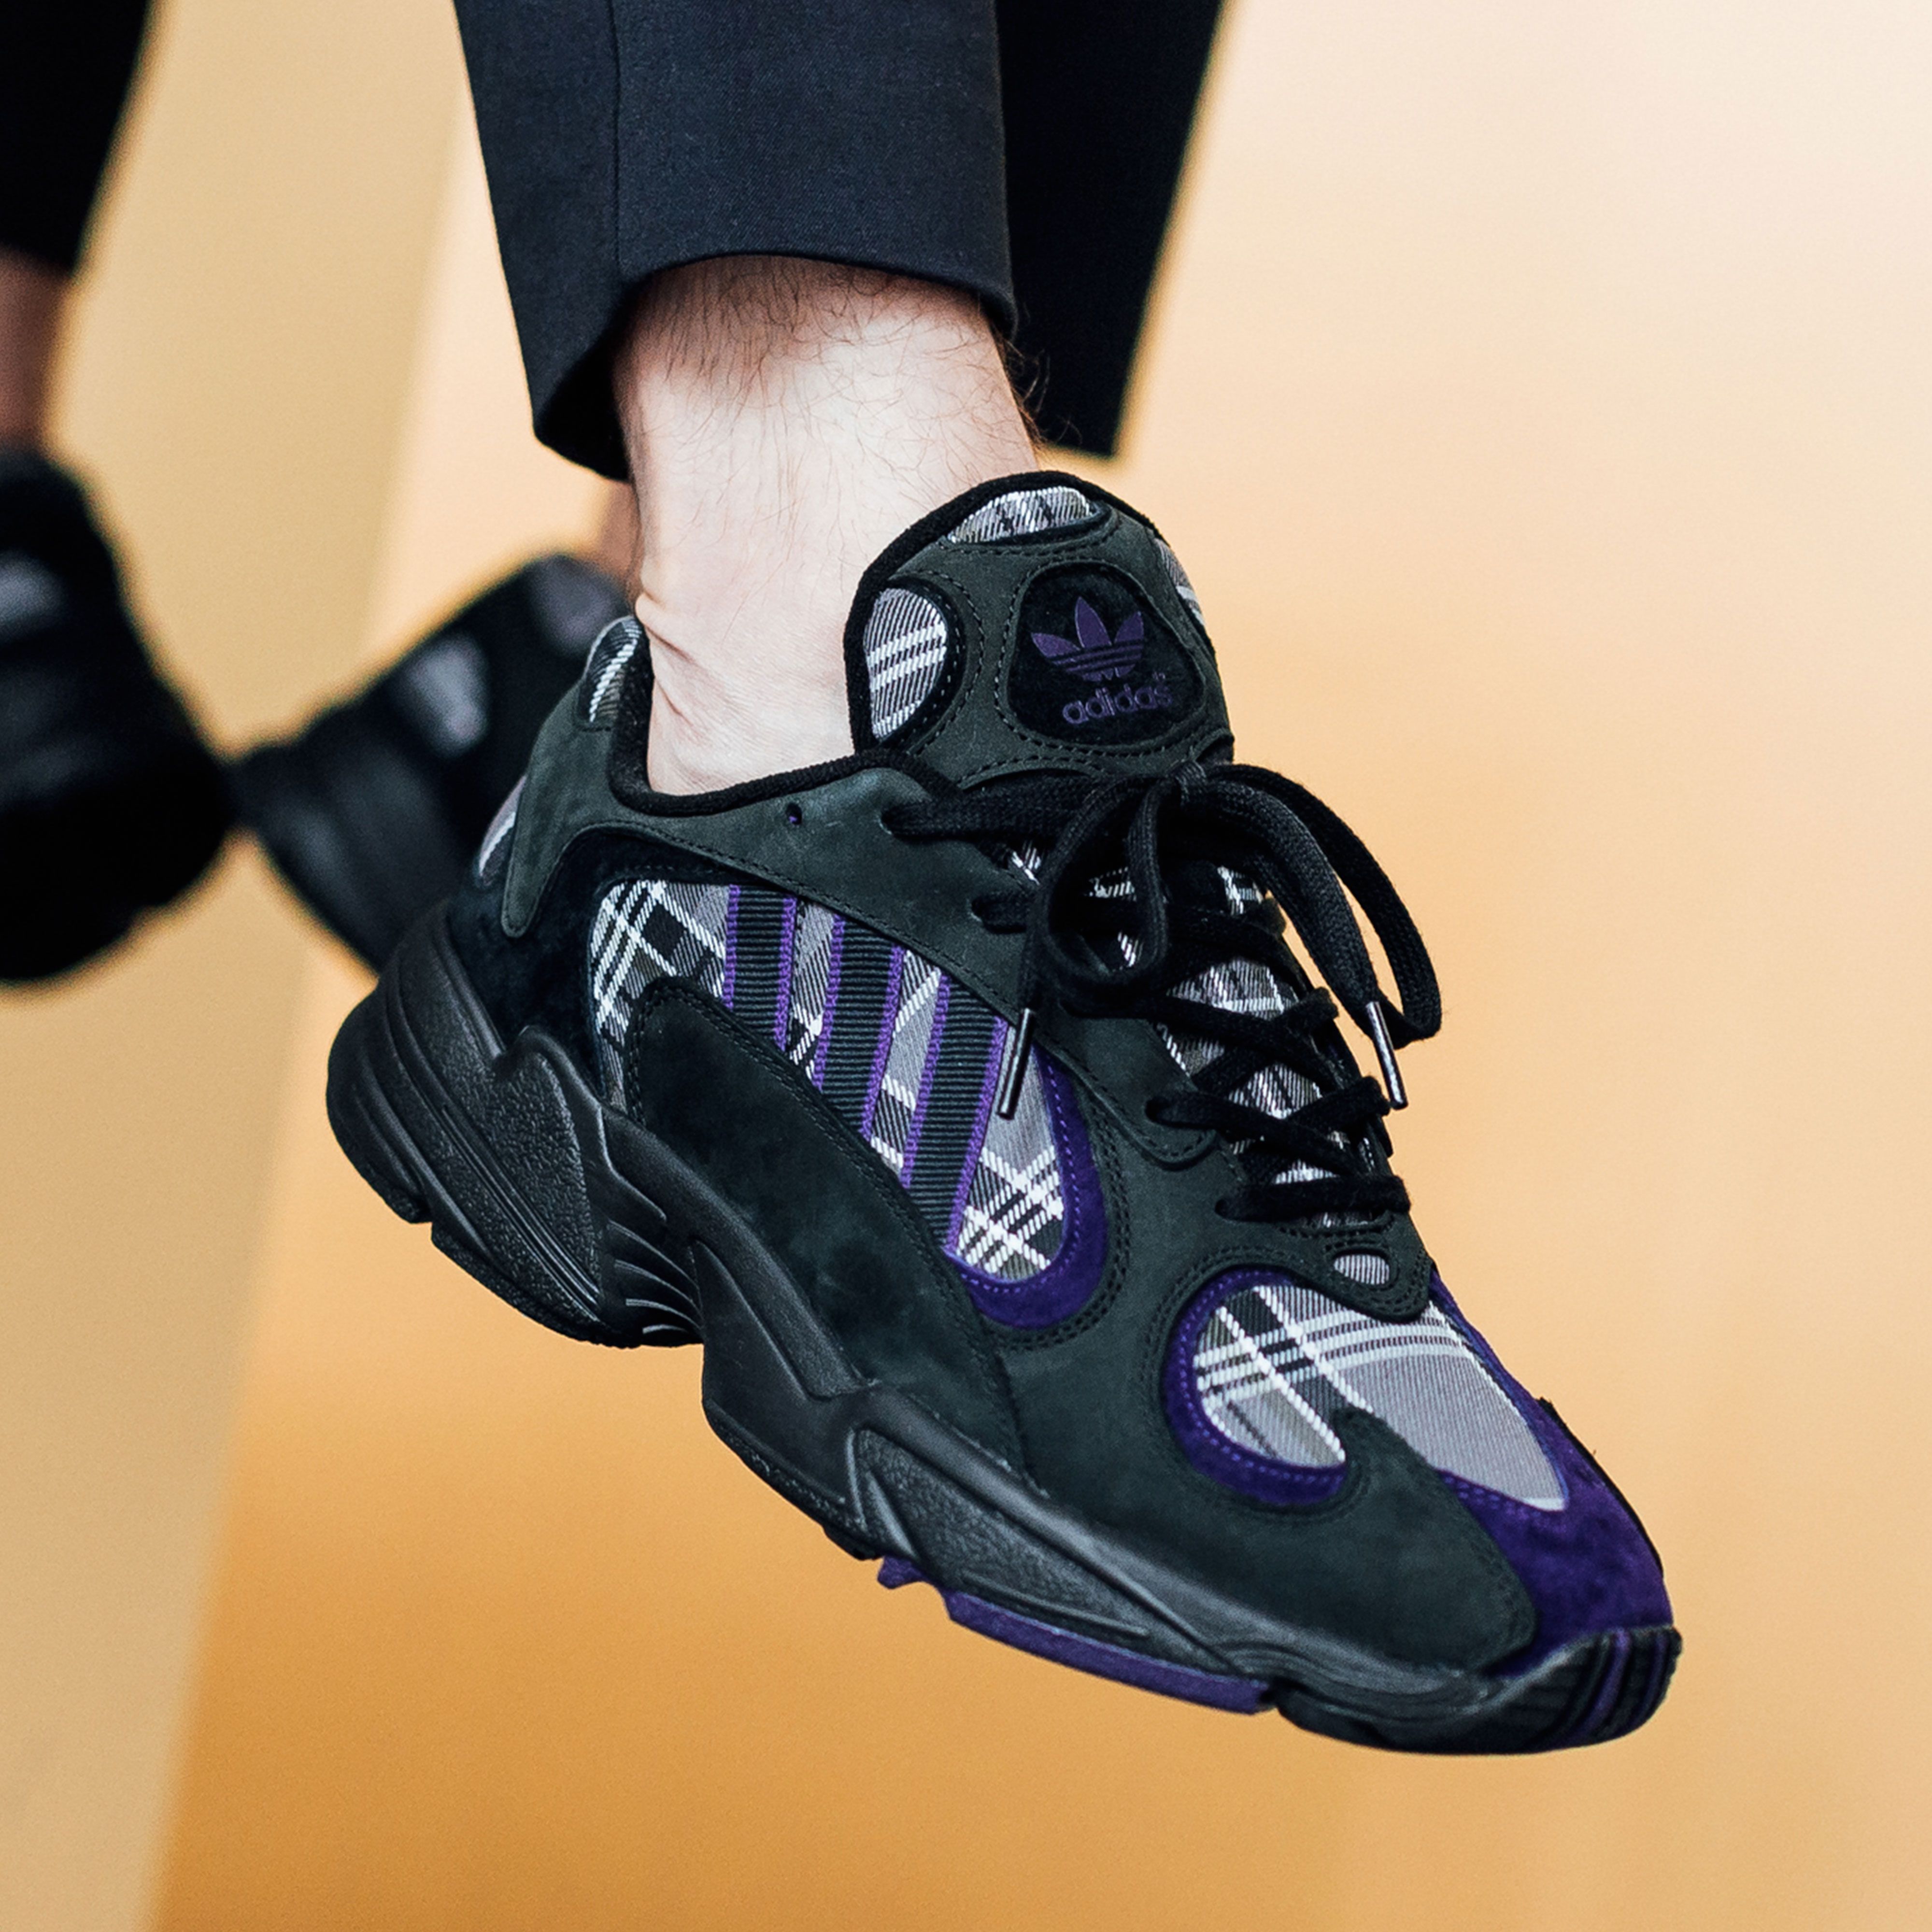 Titolo on Twitter: now ✨ Adidas Yung-1 "Plaid" shop here ➡️ https://t.co/m9SEkMstBM shop here ➡️ https://t.co/6kZb0WkxDV sizerun : uk 6.5 (40) - uk 10.5 (45 style code 🔎 EF3965 &amp;